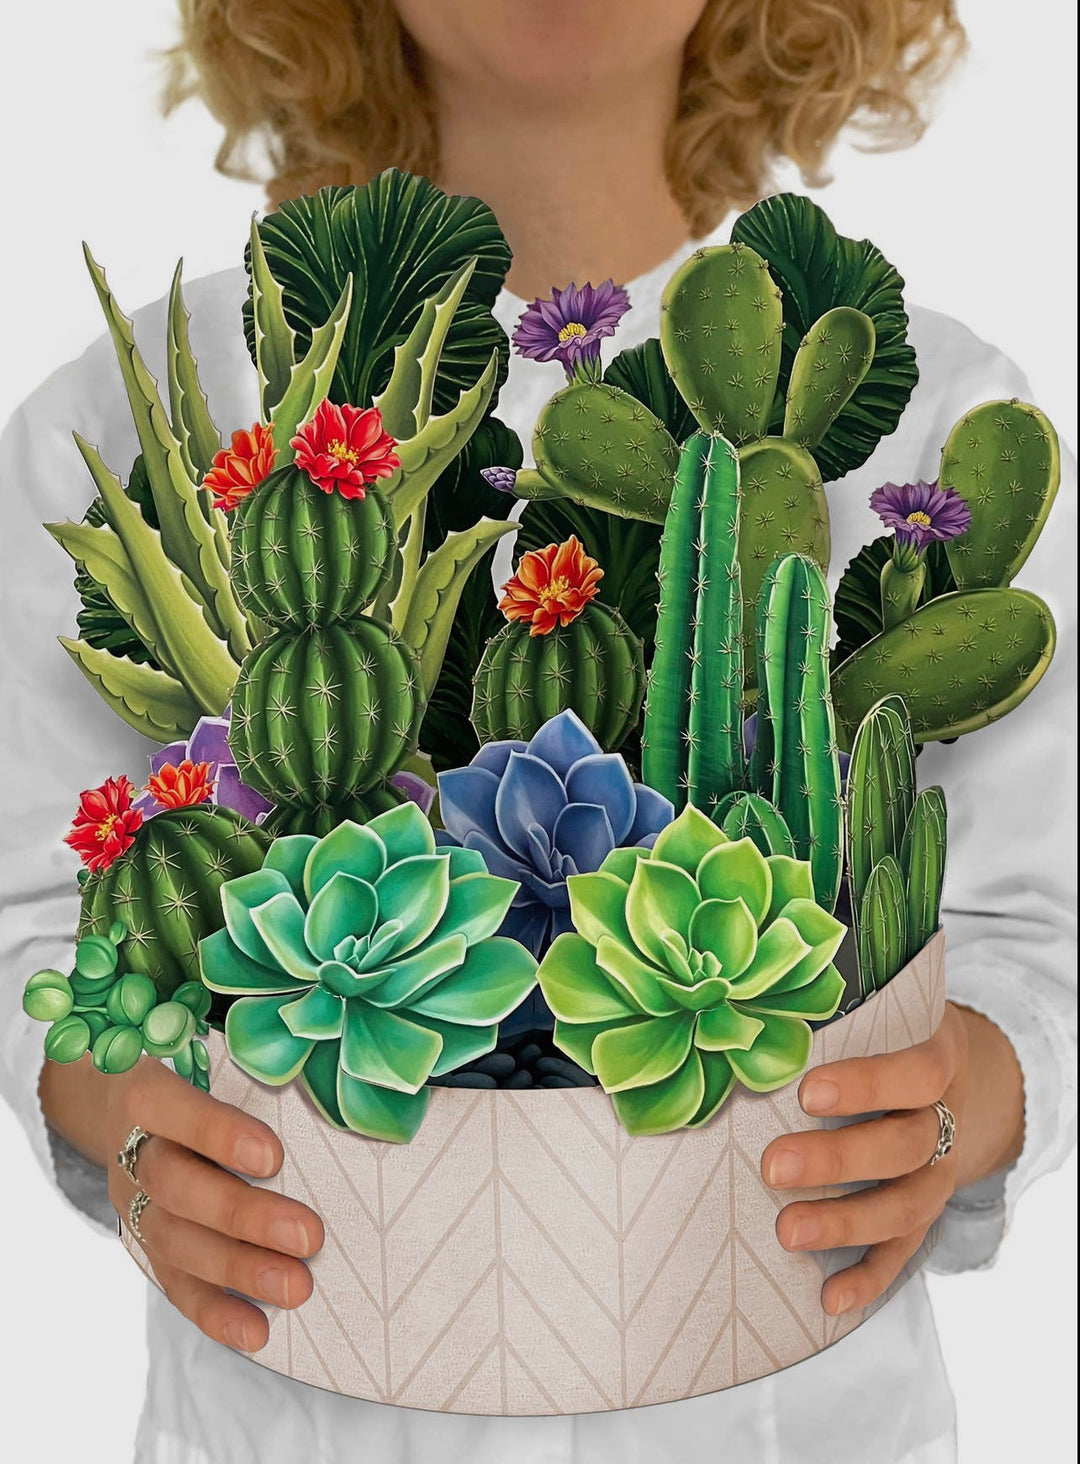 Pop-up 3D Greeting Card, Cactus Garden-220 Beauty/Gift-Inspired by Justeen-Women's Clothing Boutique in Chicago, Illinois